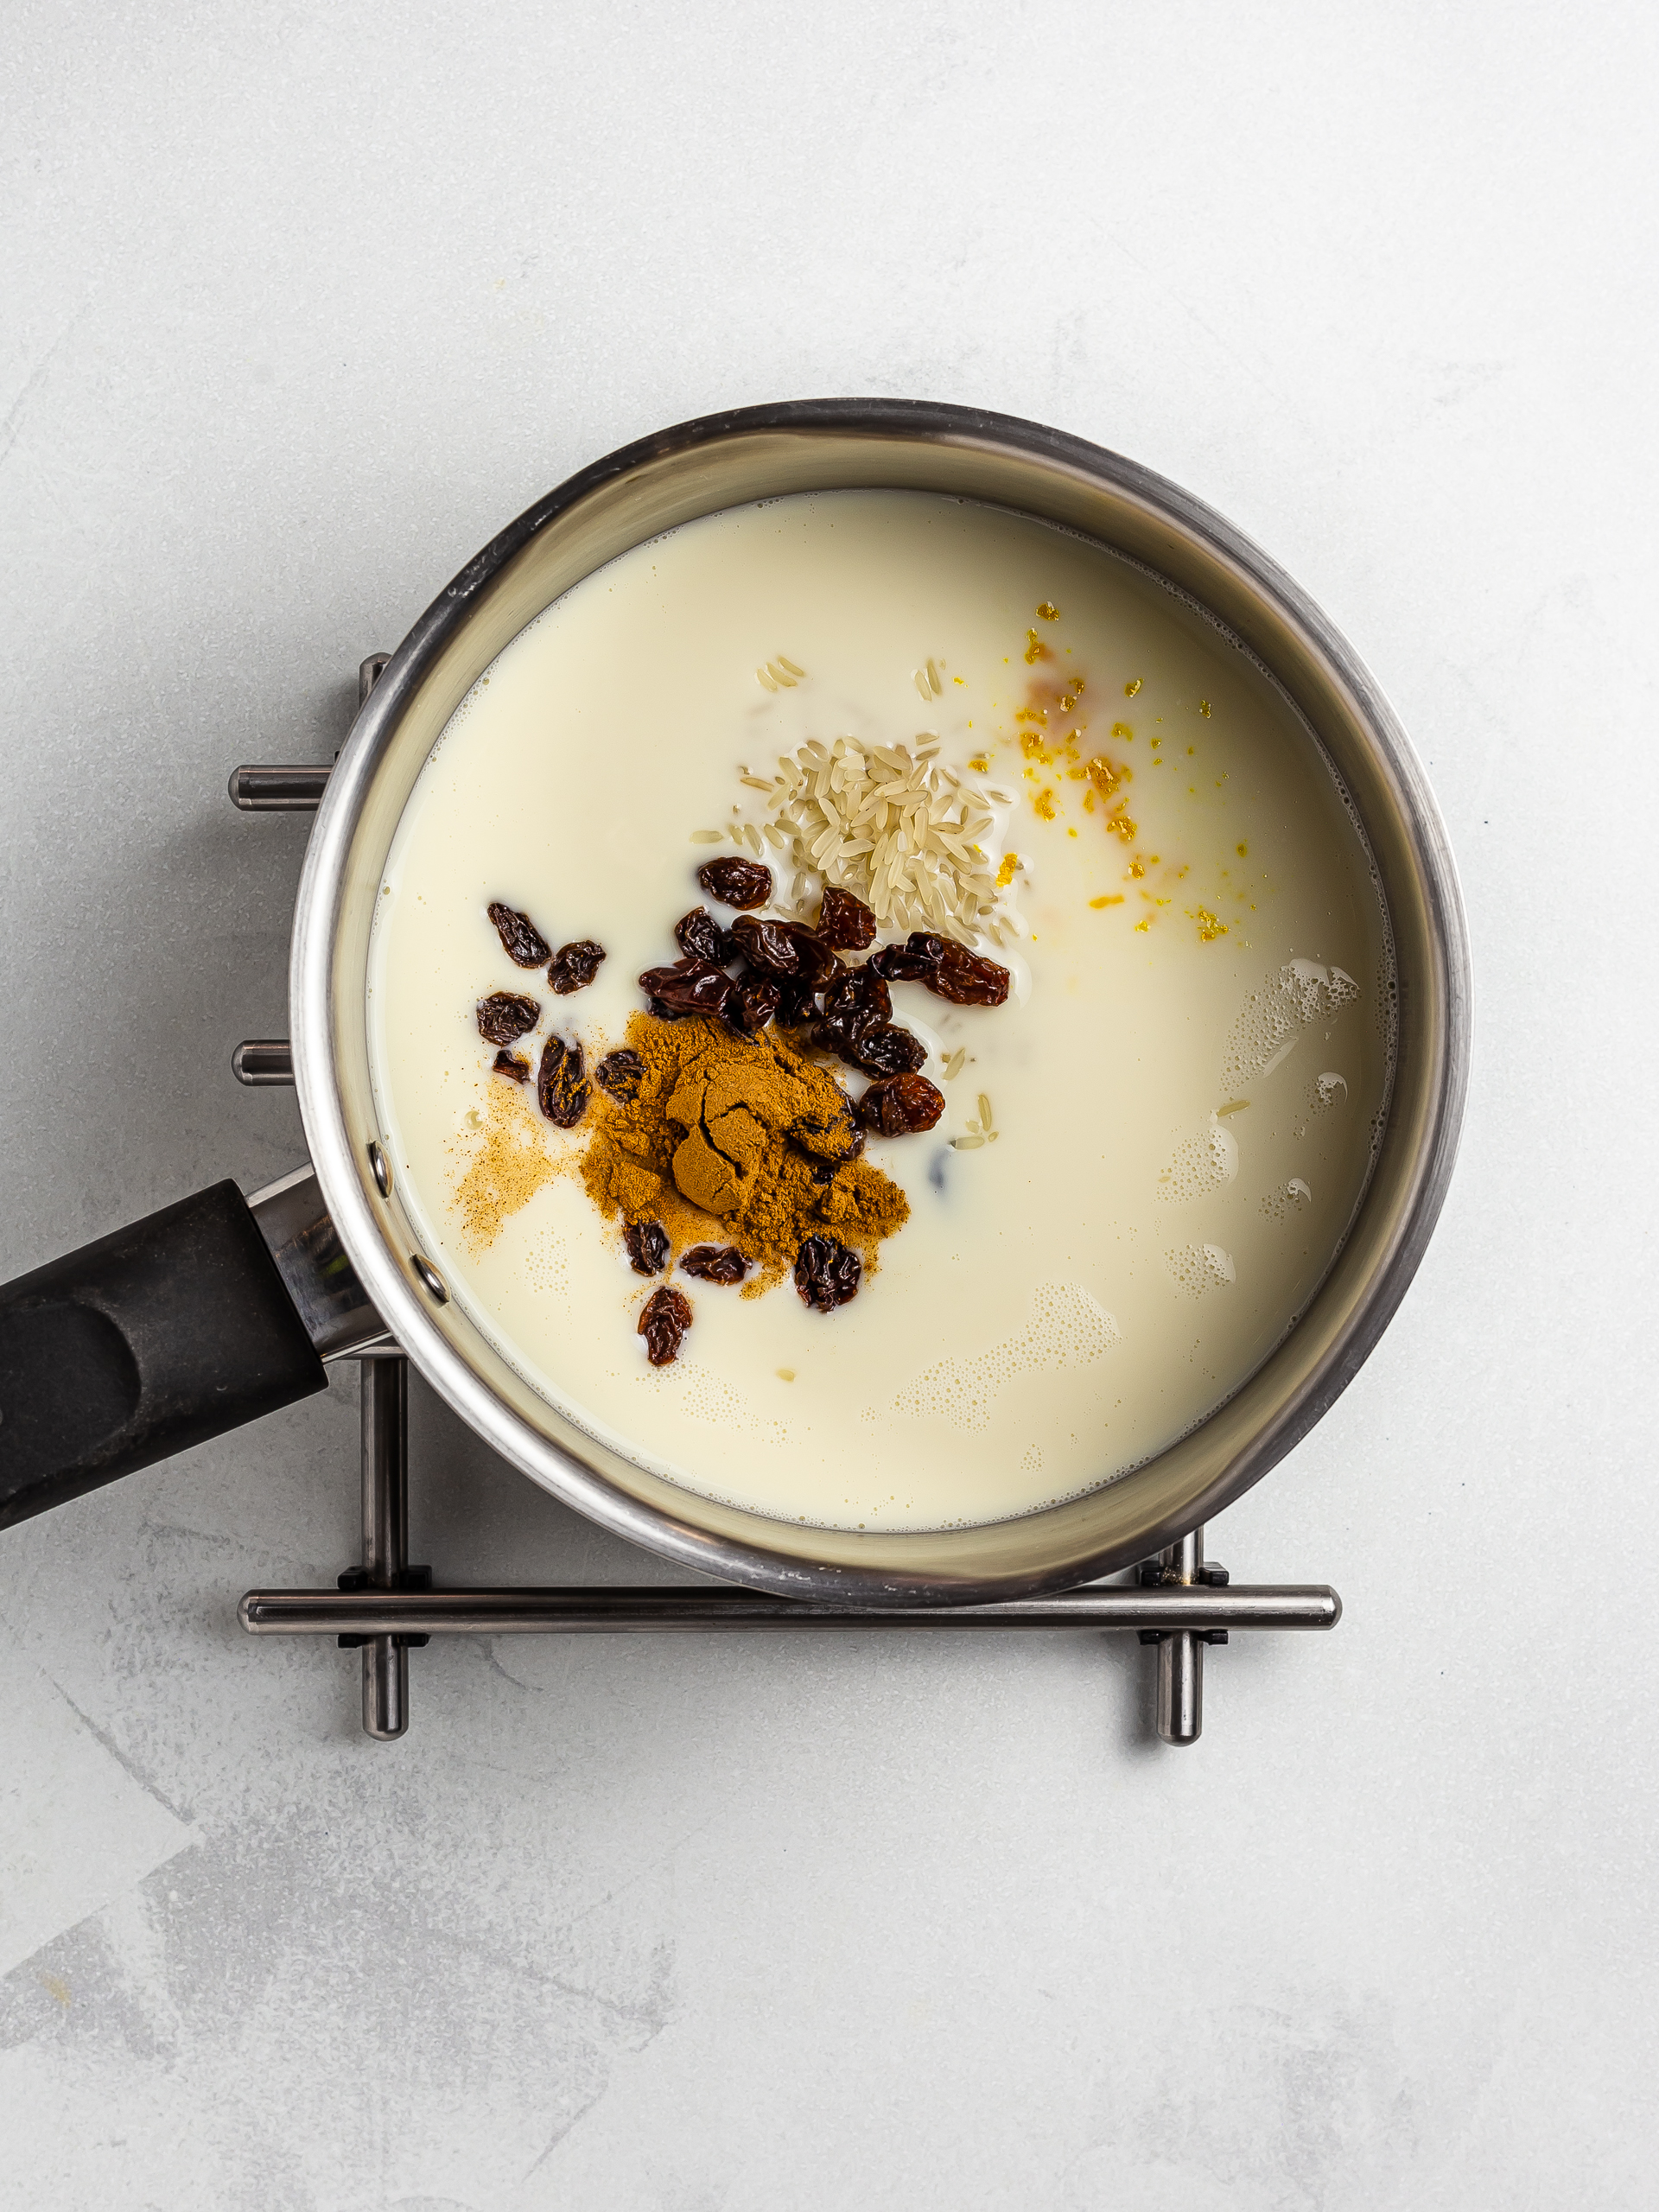 coconut milk with rice, raisins and cinnamon for pudding